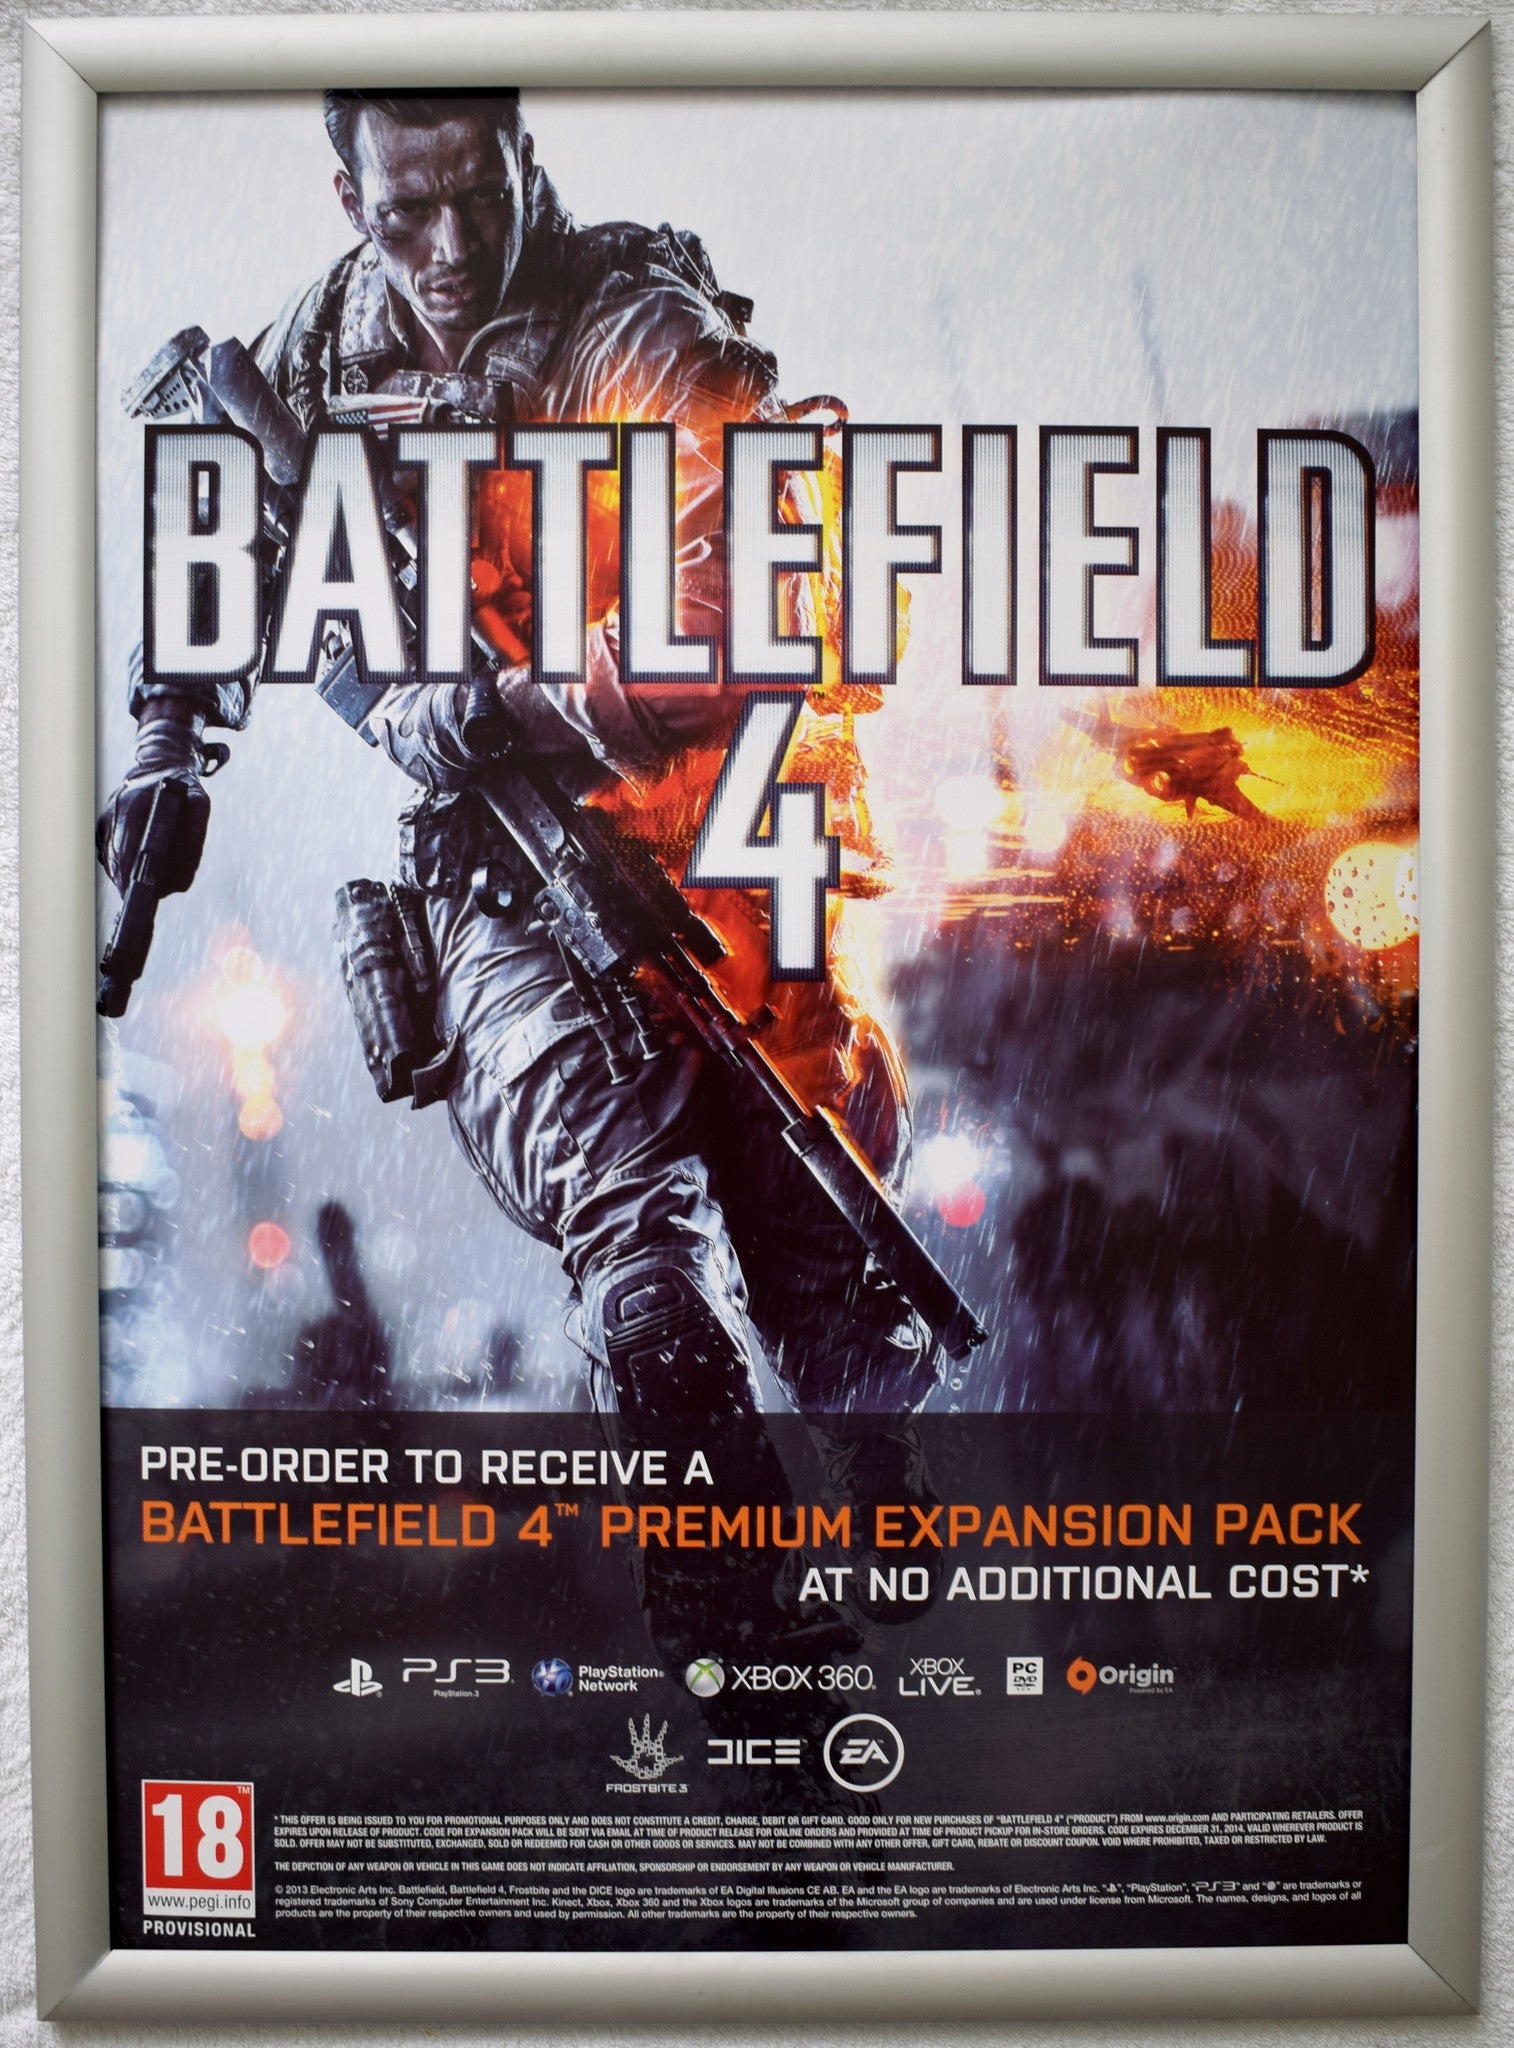 Battlefield 4 (A2) Promotional Poster Set of 4